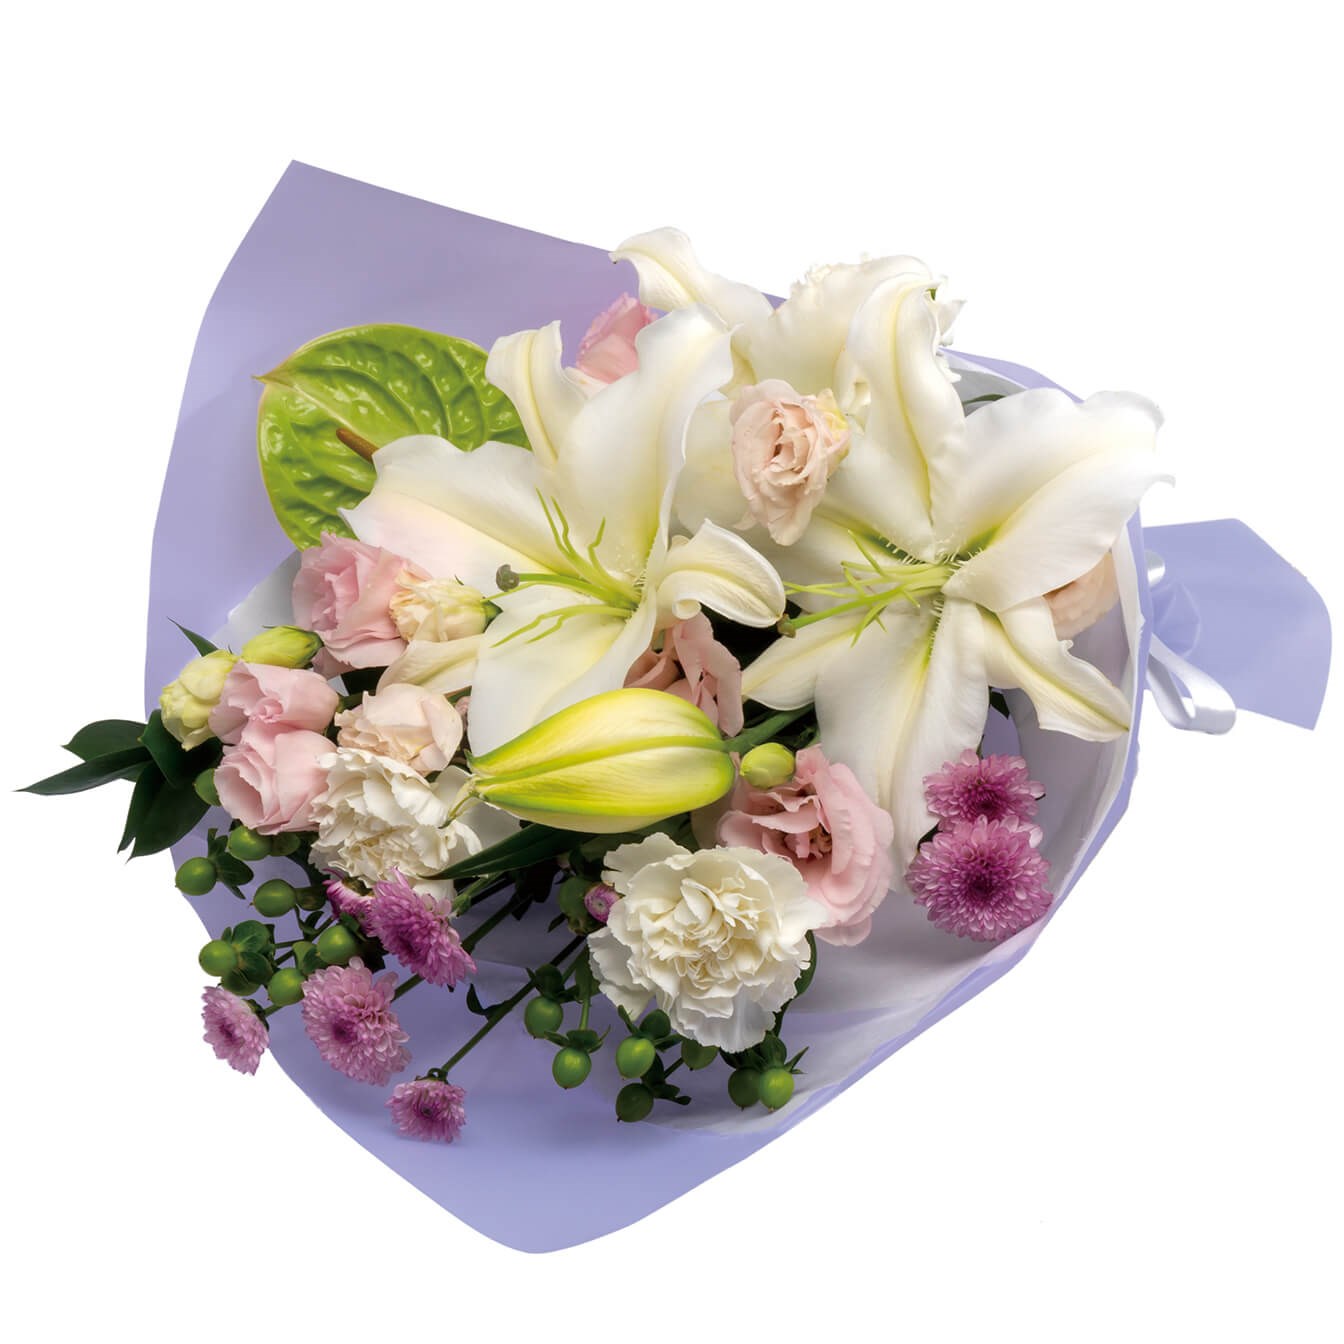 product image for Sympathy bouquet in white with some pastel colors